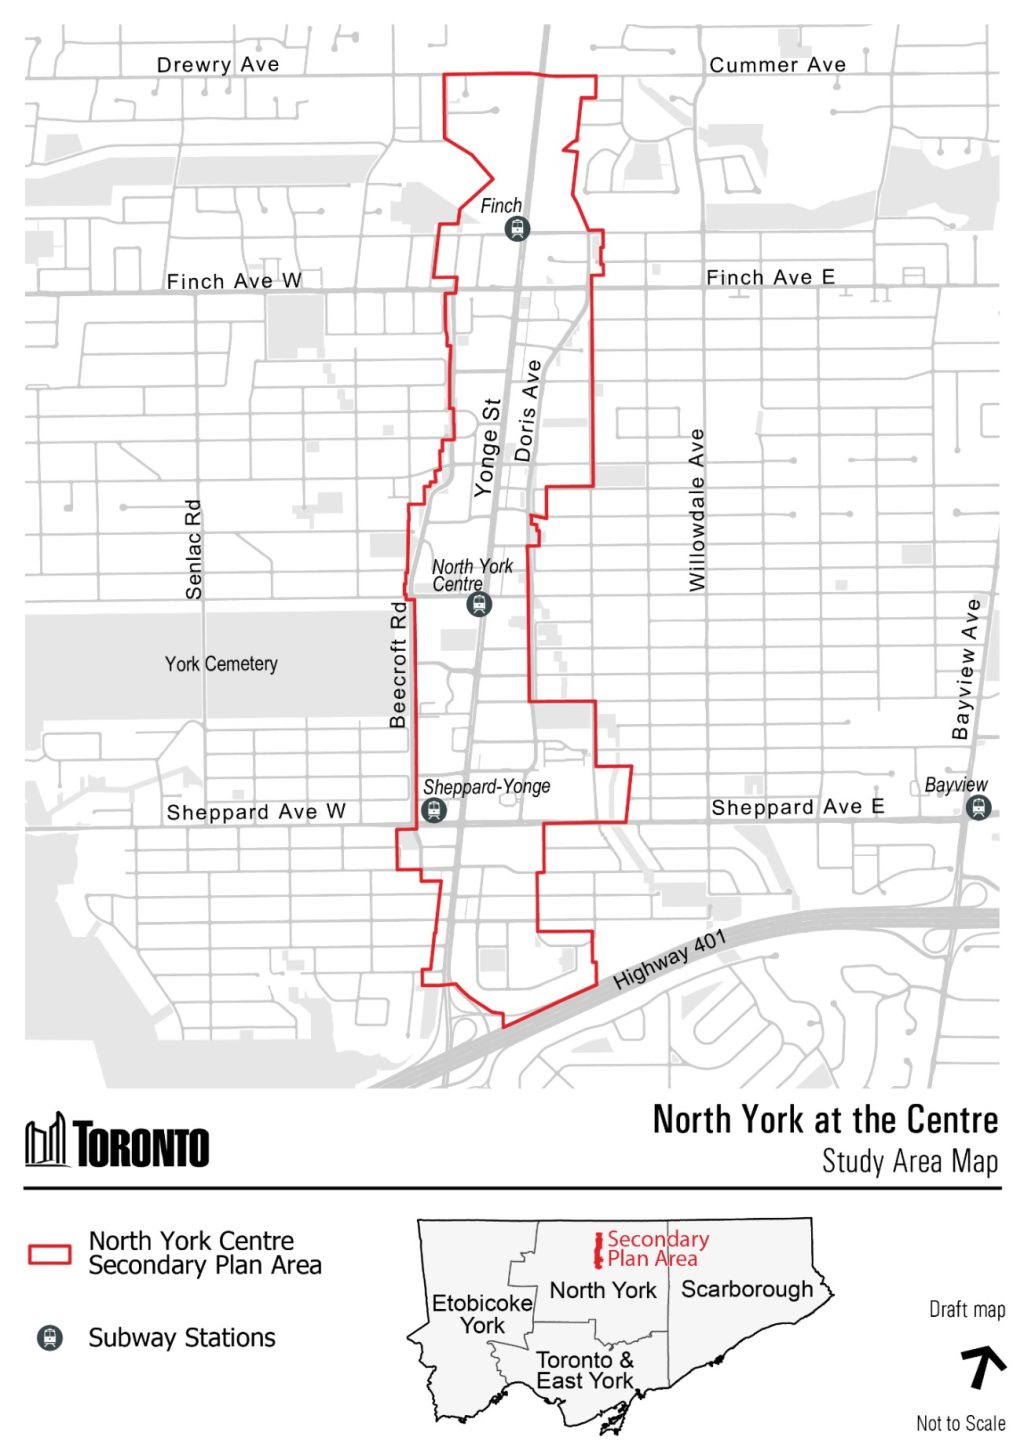 A map showing the boundaries of the North York Centre Secondary Plan area, as well as a key map showing the location of the area within the overall city context.